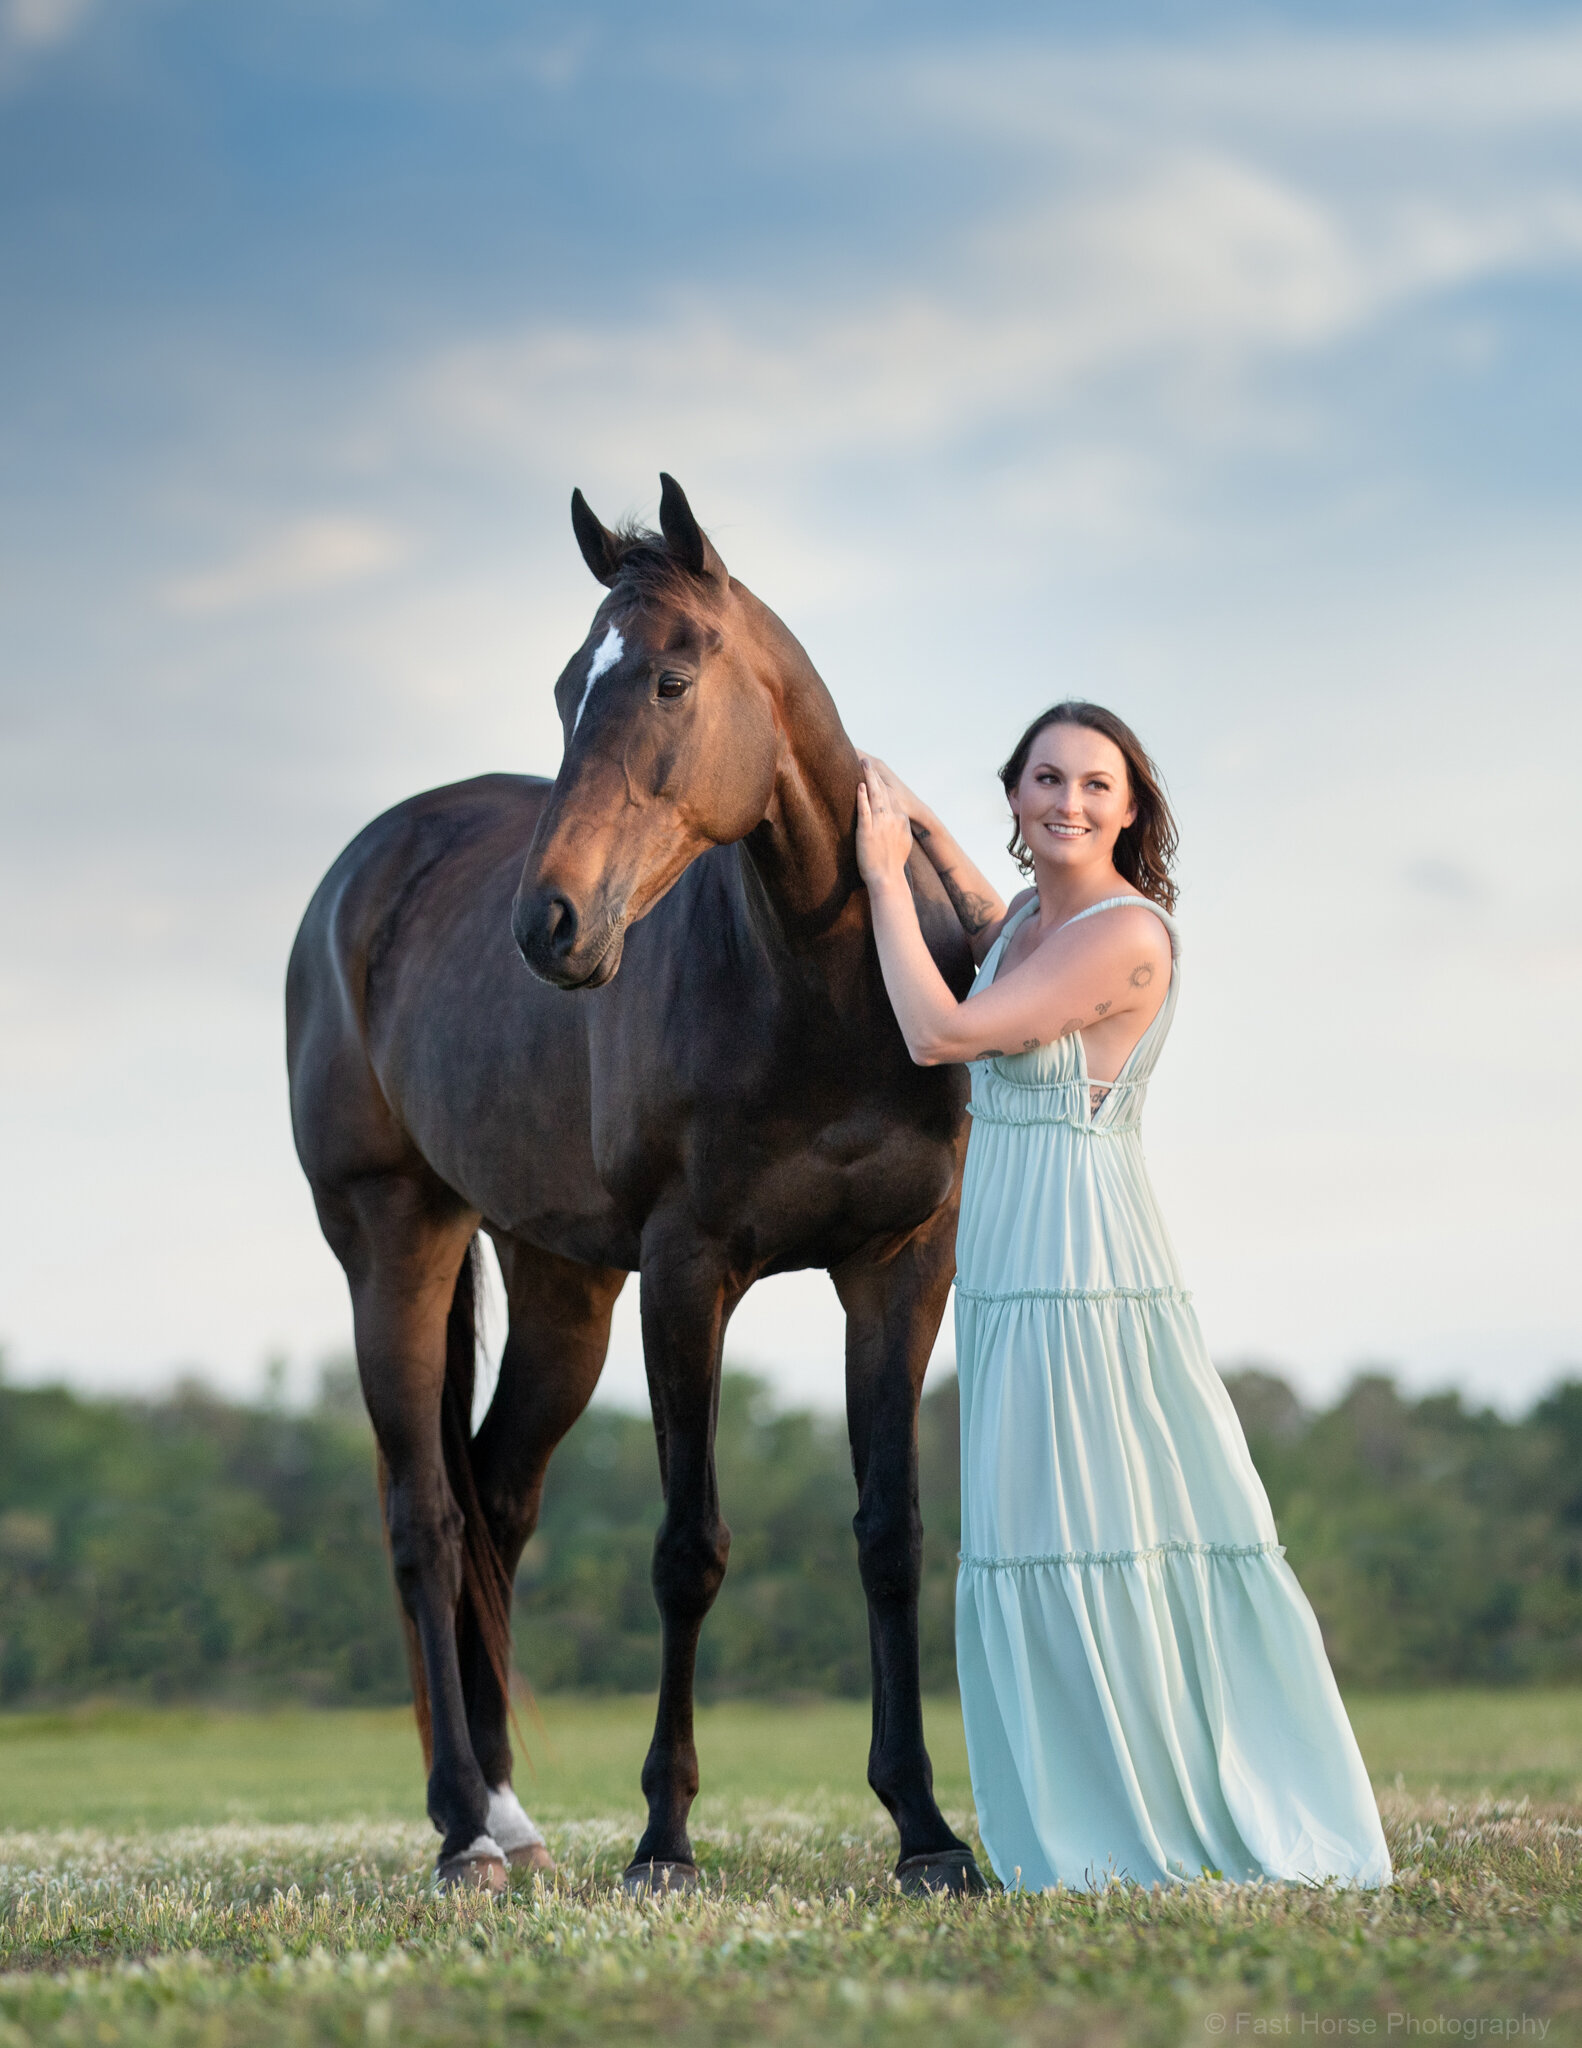 Fast Horse Photography_melissa and Vego-3.jpg